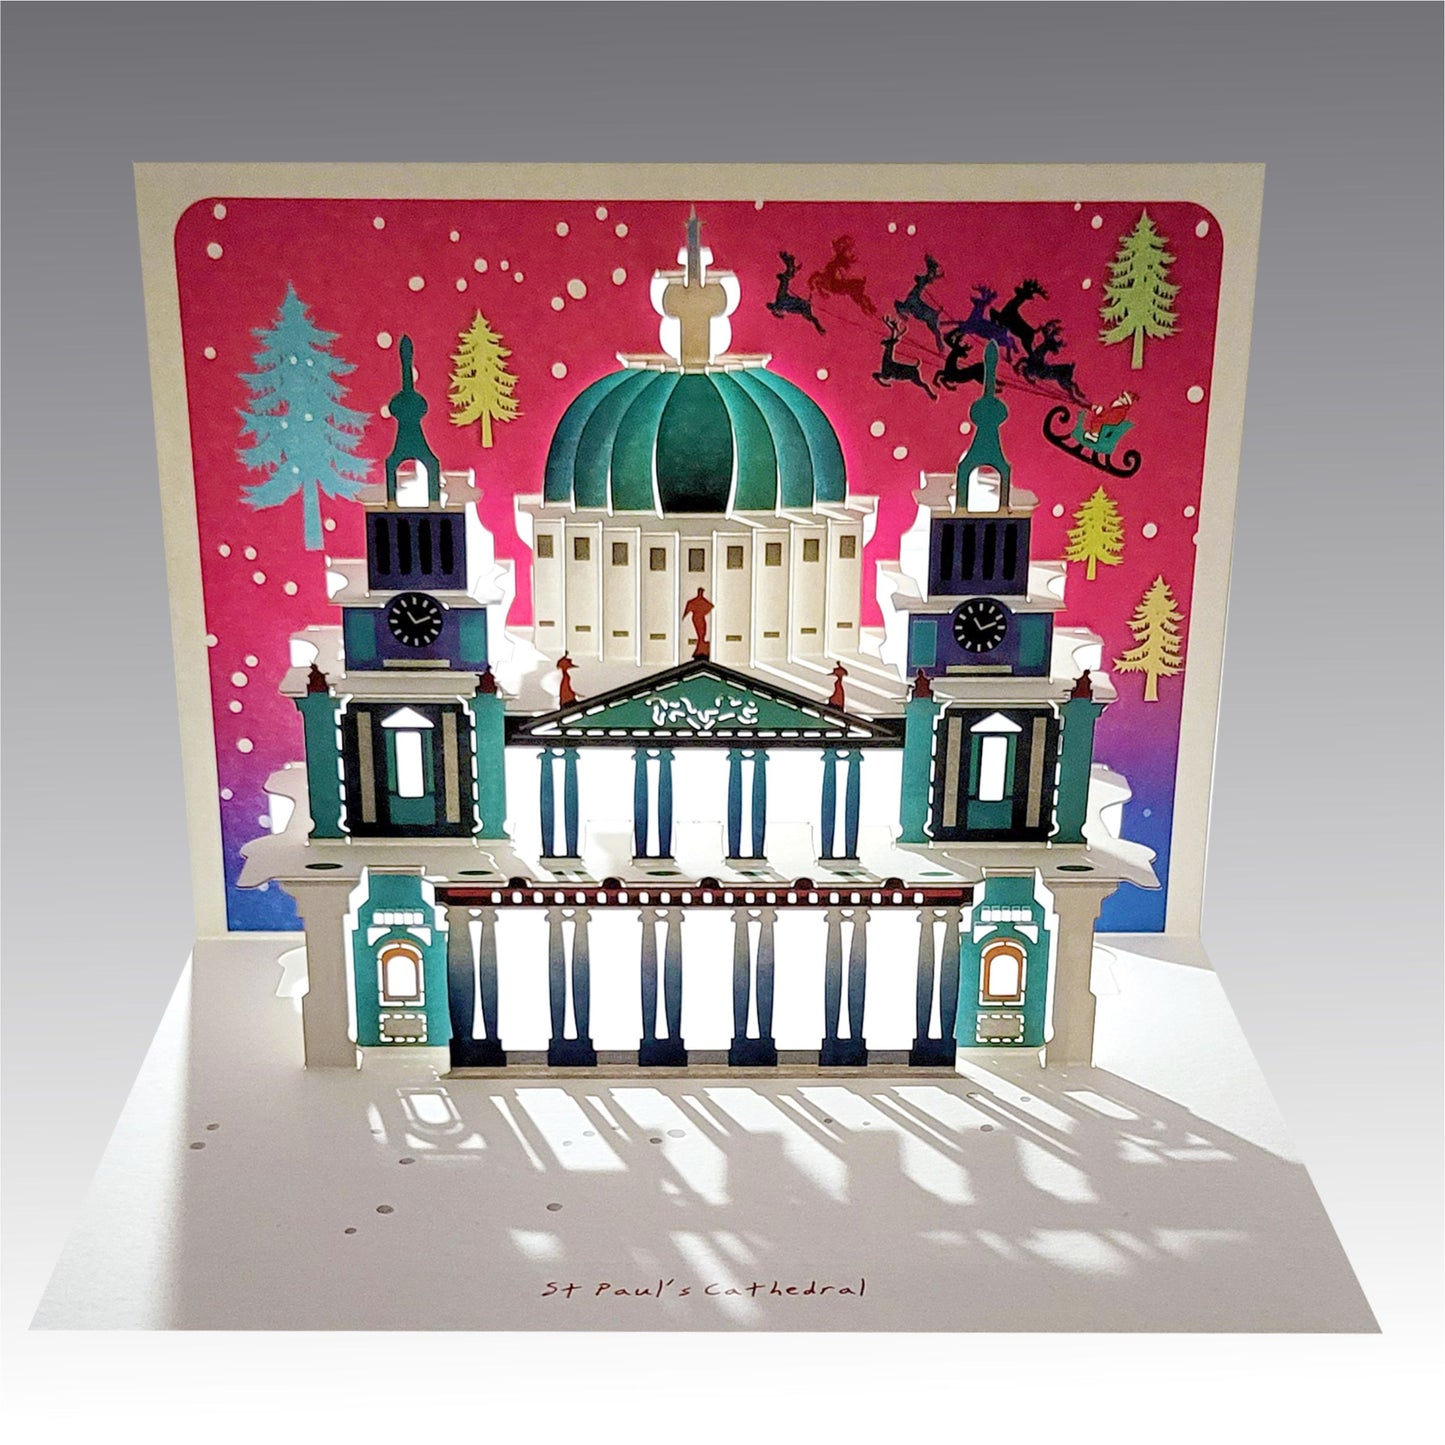 Pop Up ''St Paul's Cathedral'' Pink Christmas Card - 3d Card, Pop Up Card - #POP-034-PINK